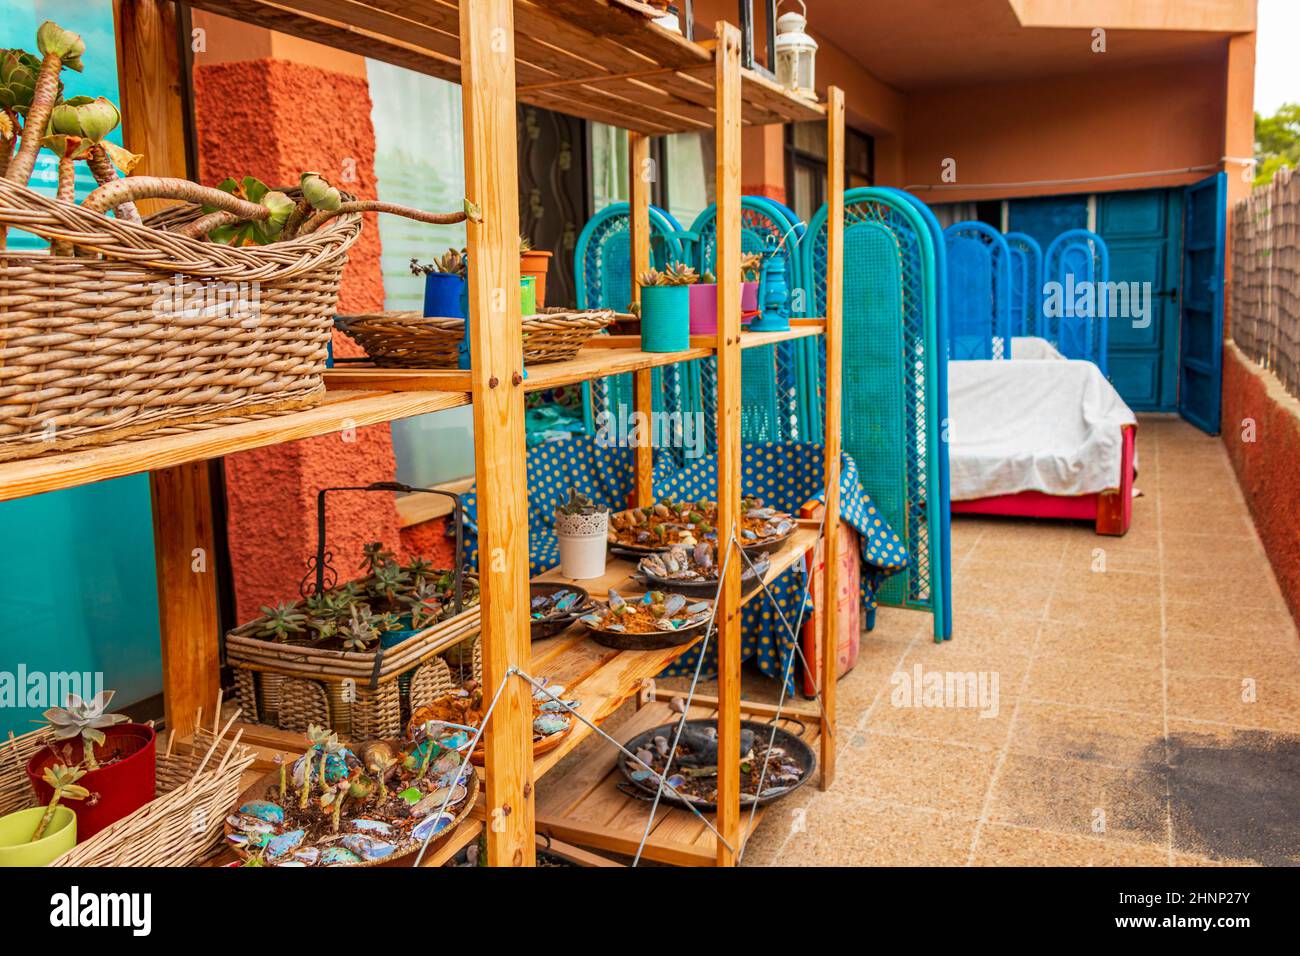 Chaotic and crowded guesthouse hostel room on Mallorca Spain. Stock Photo